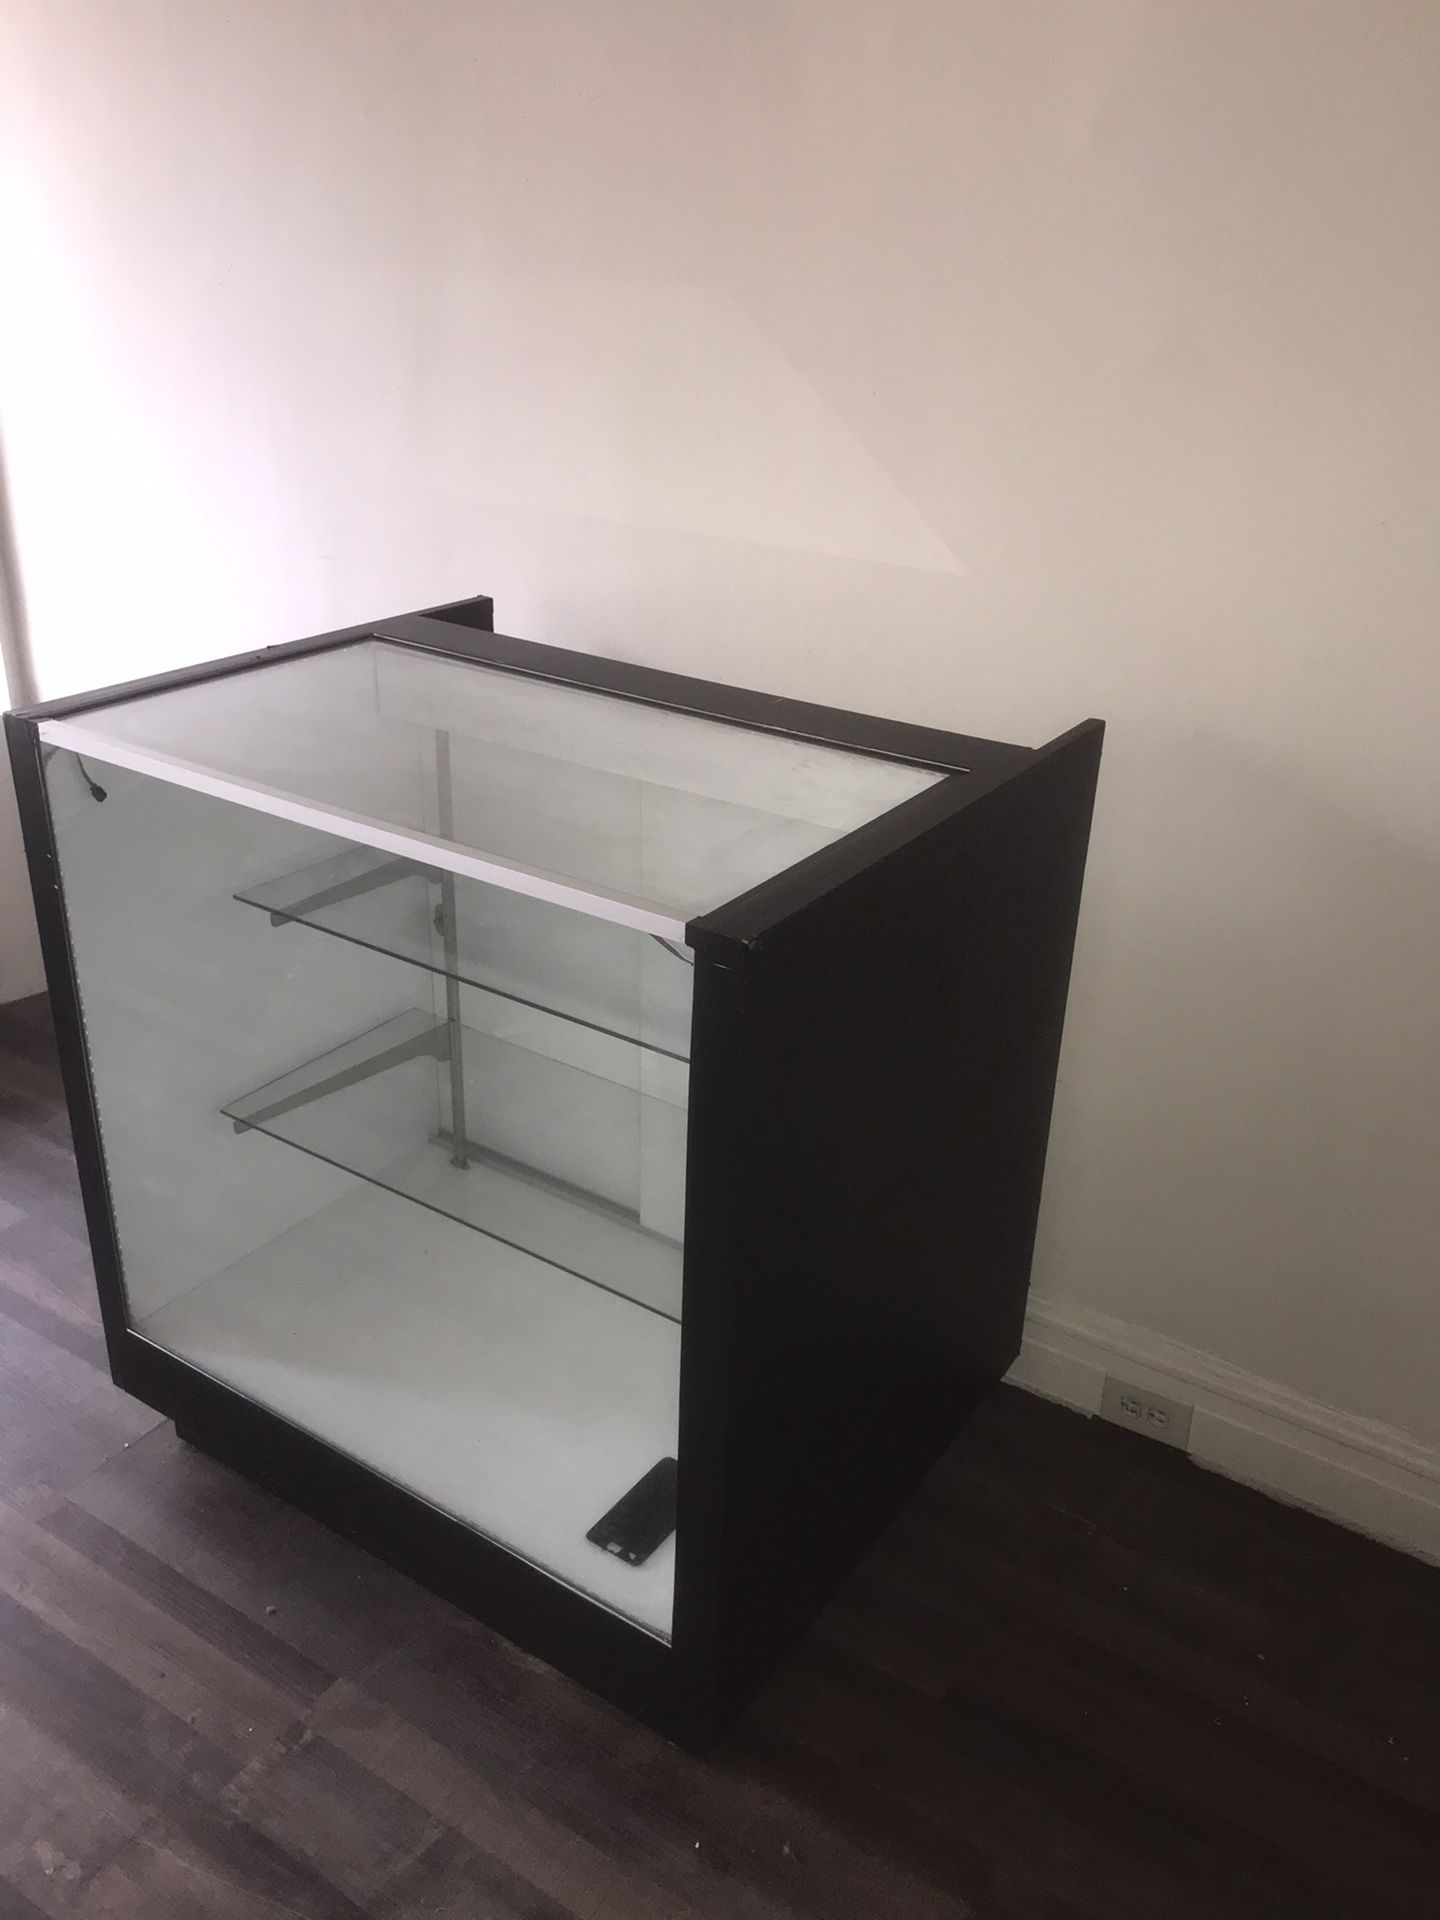 Display Cases for Free to Pick up!!!